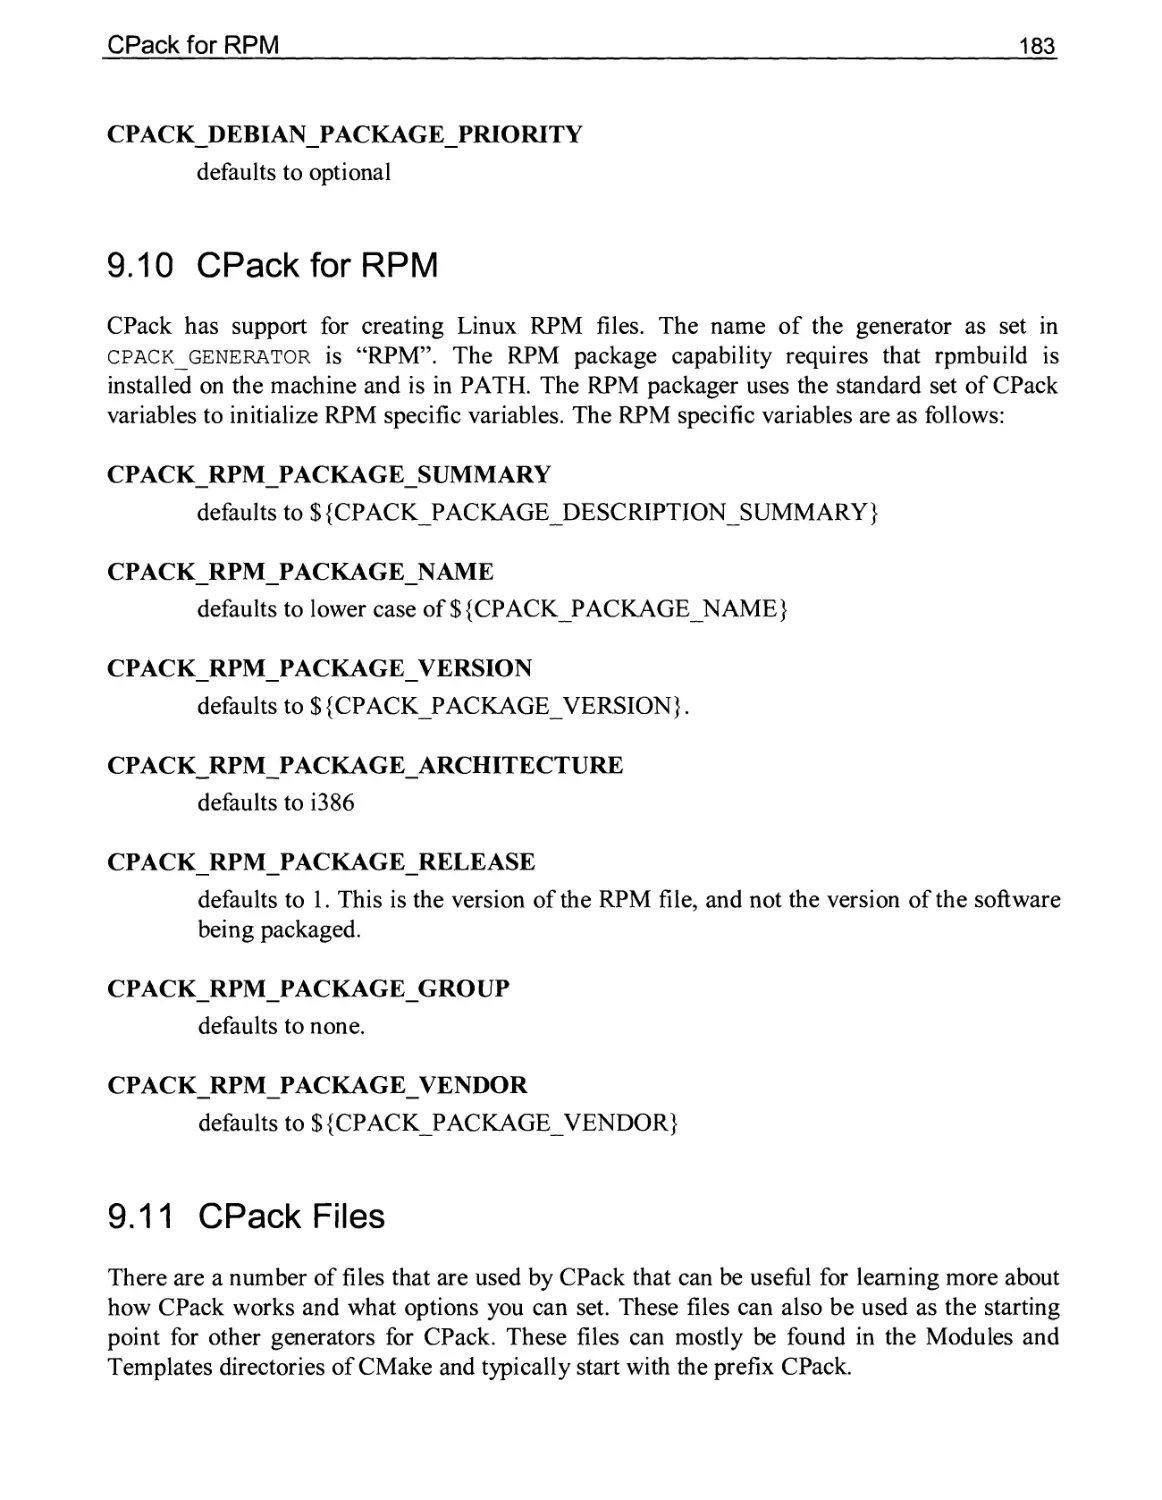 9.10 CPack for RPM
9.11 CPack Files